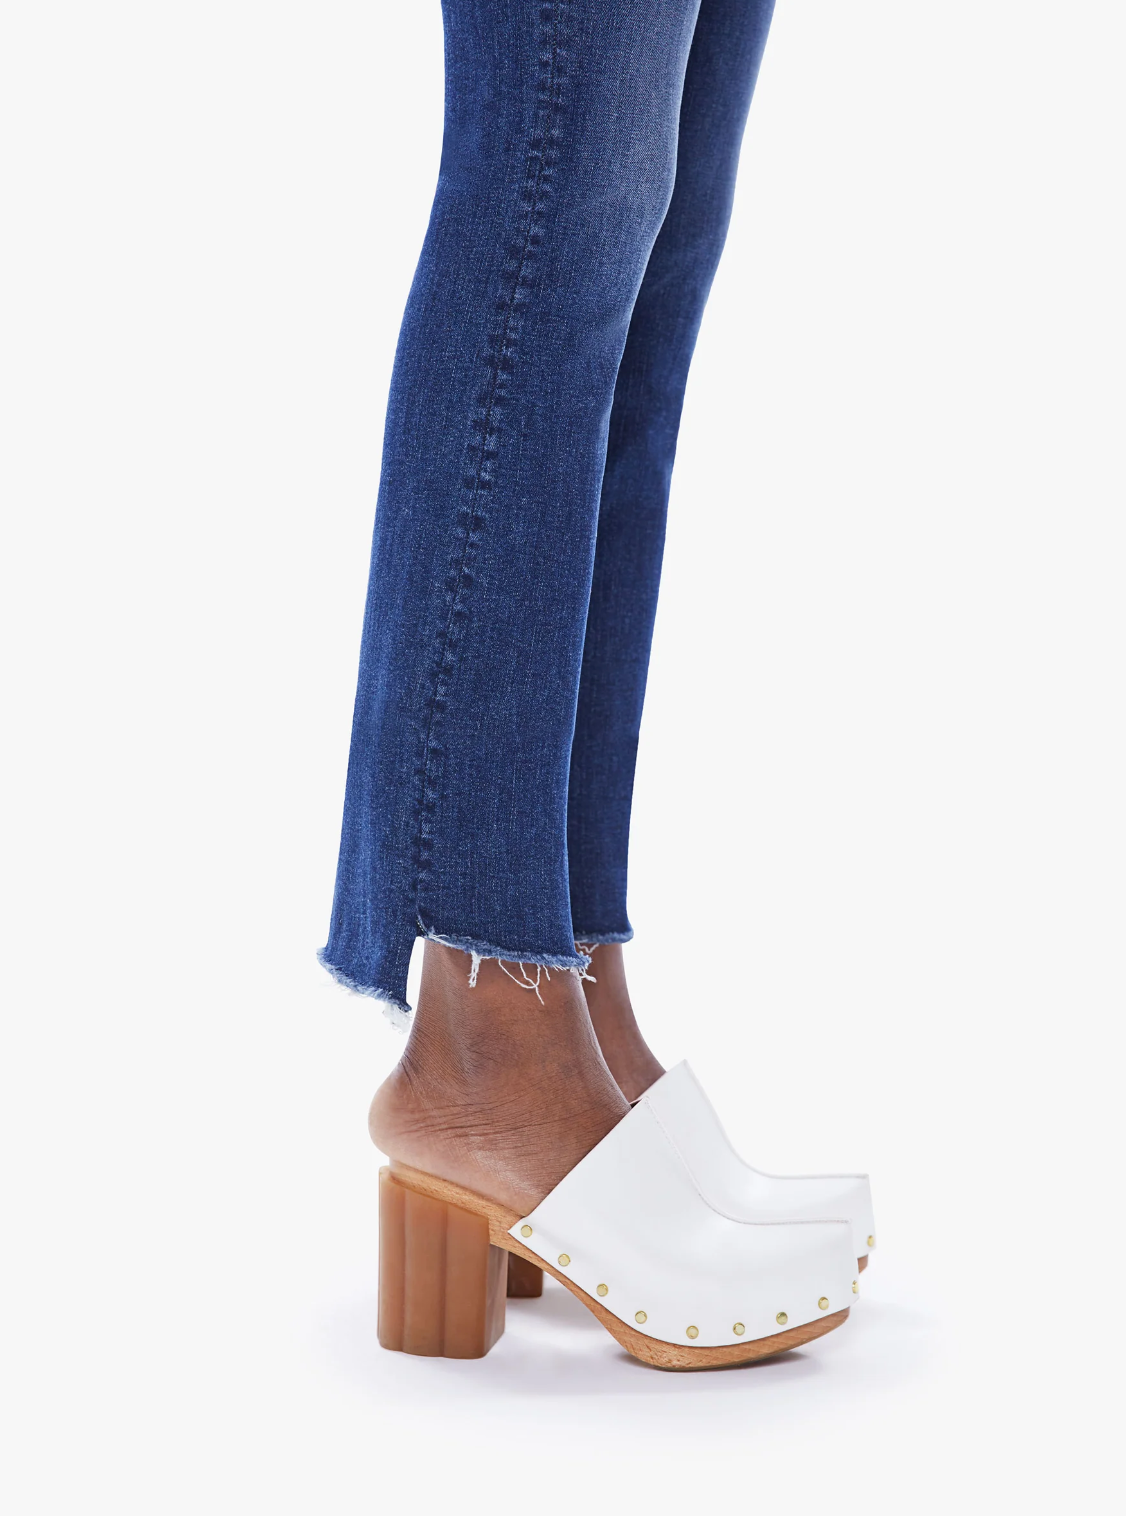 close up view of the hem of the insider crop step fray jean from Mother in teaming up blue